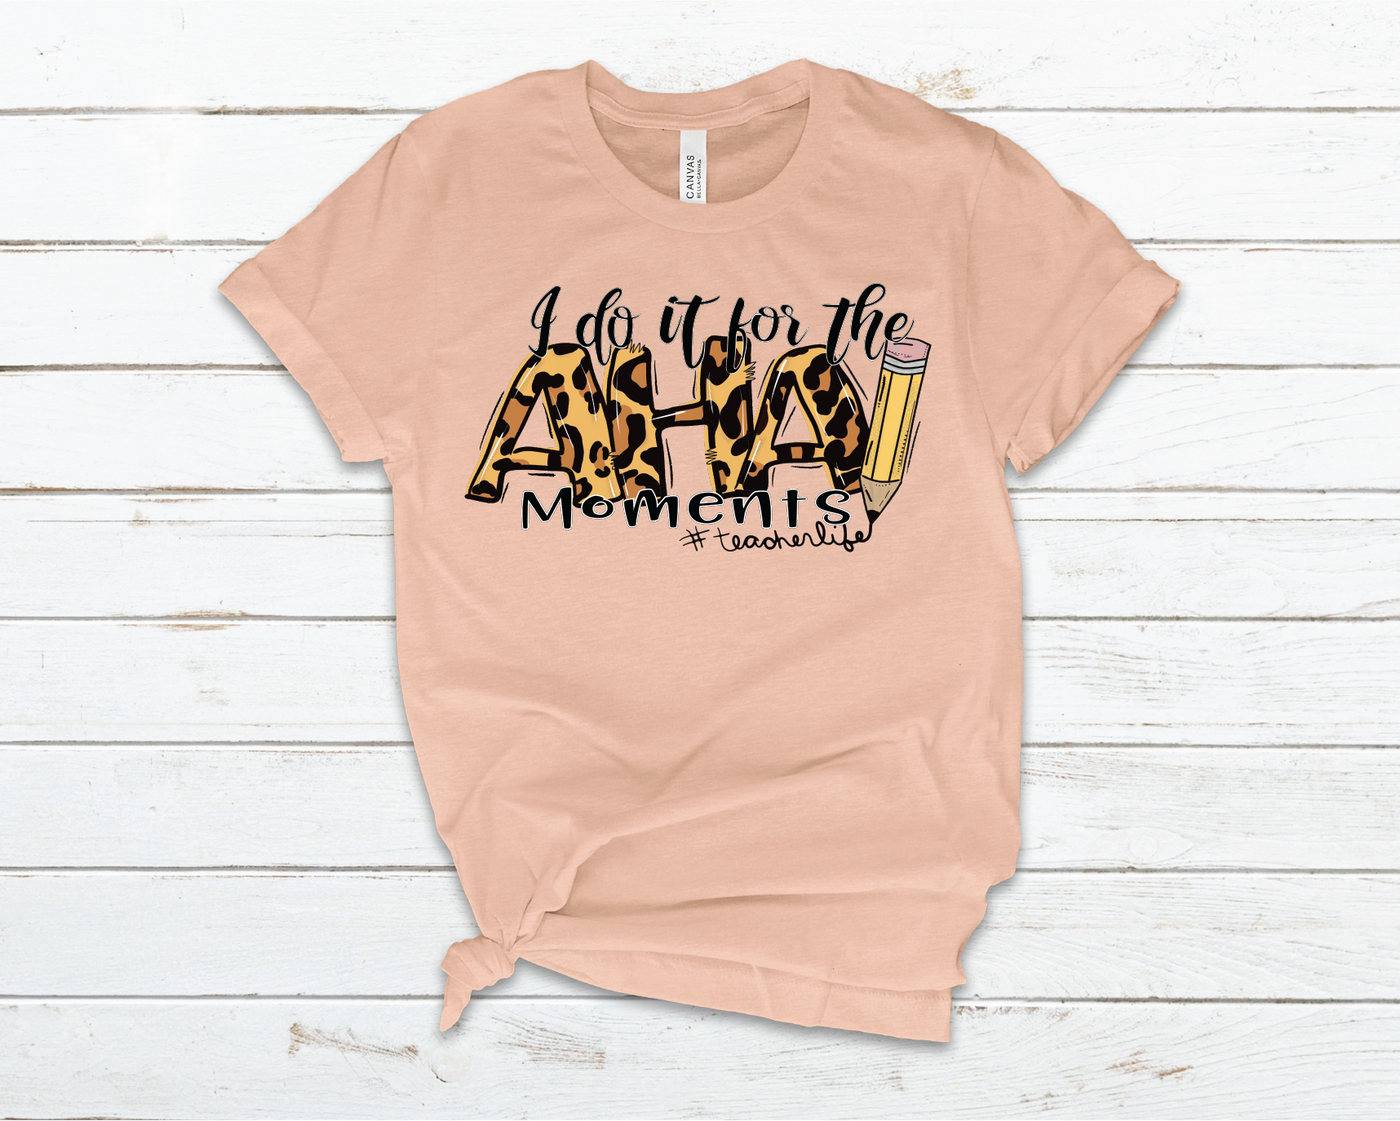 I do it for the AHA moments Tee